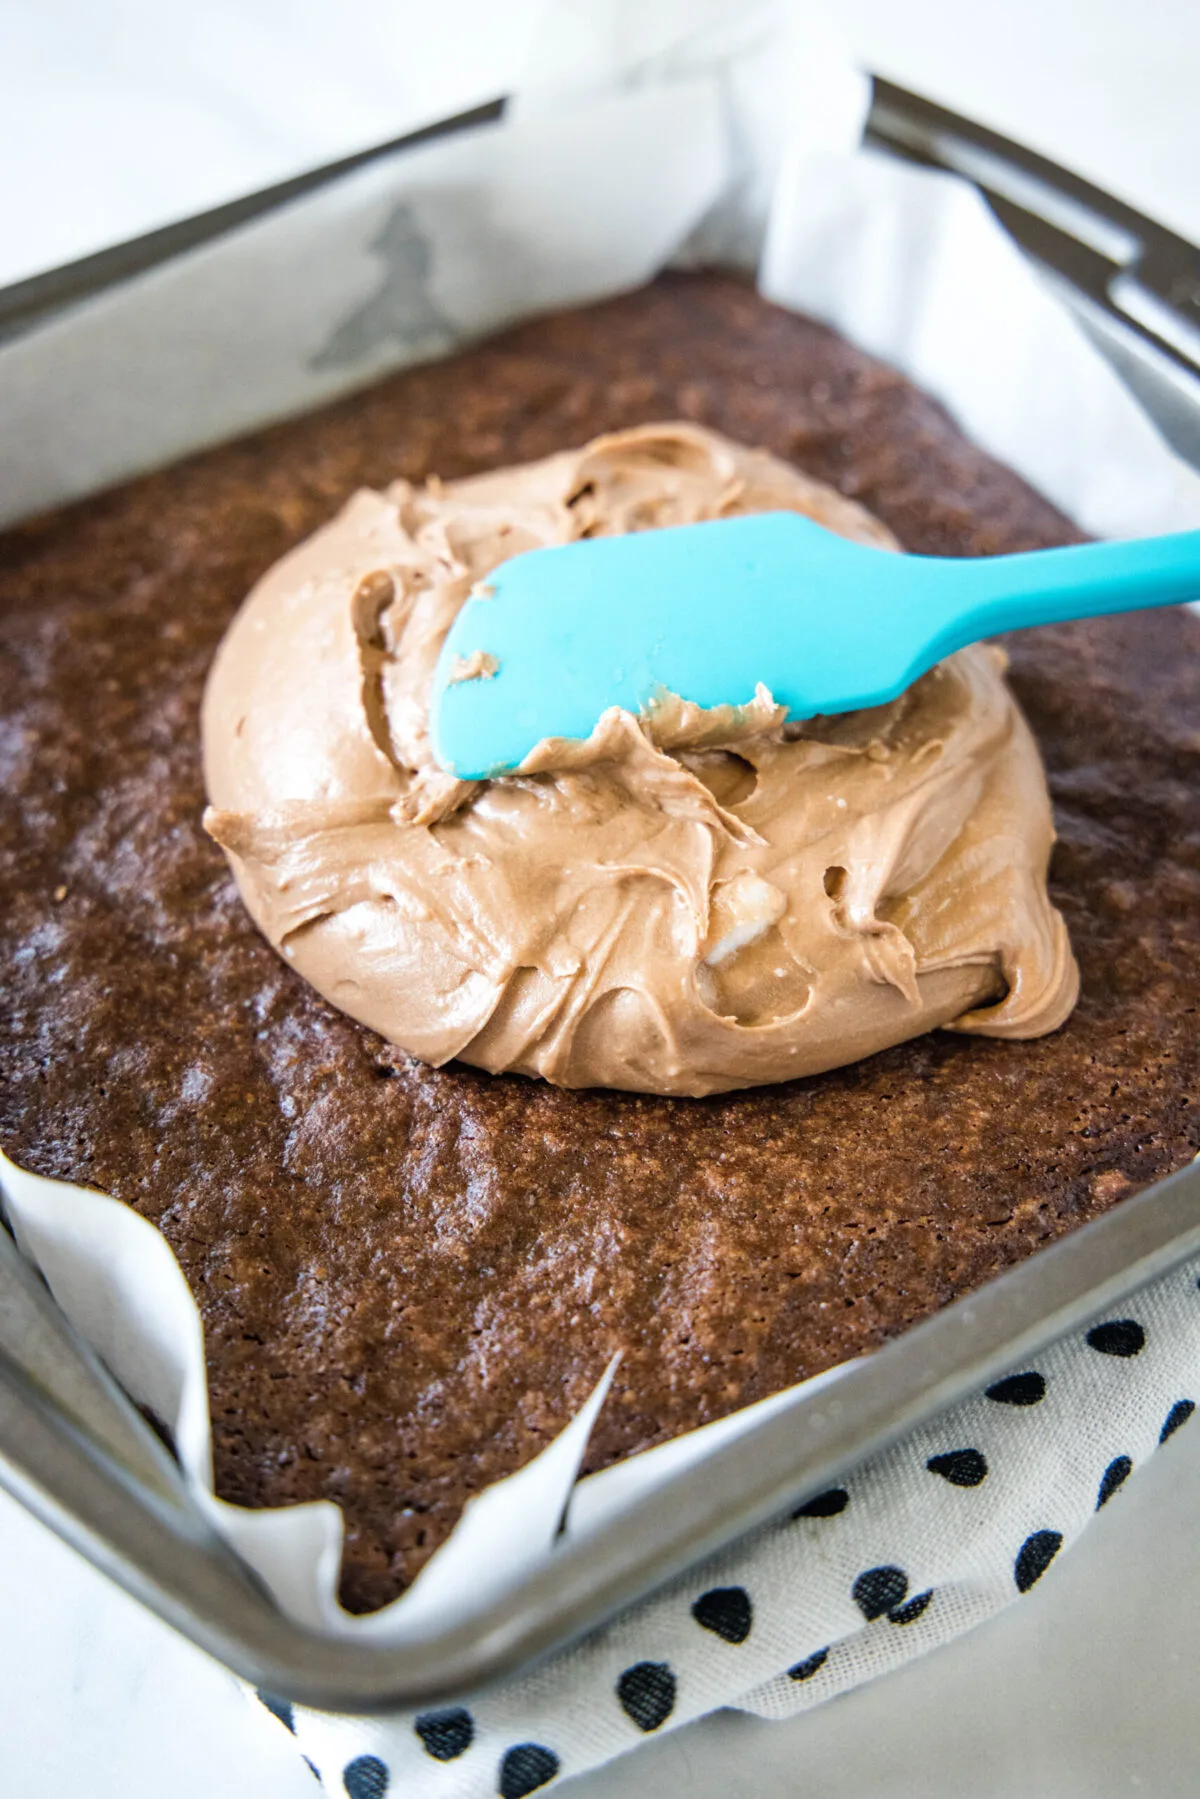 A rubber spatula spreading chocolate frosting over a pan of brownies.